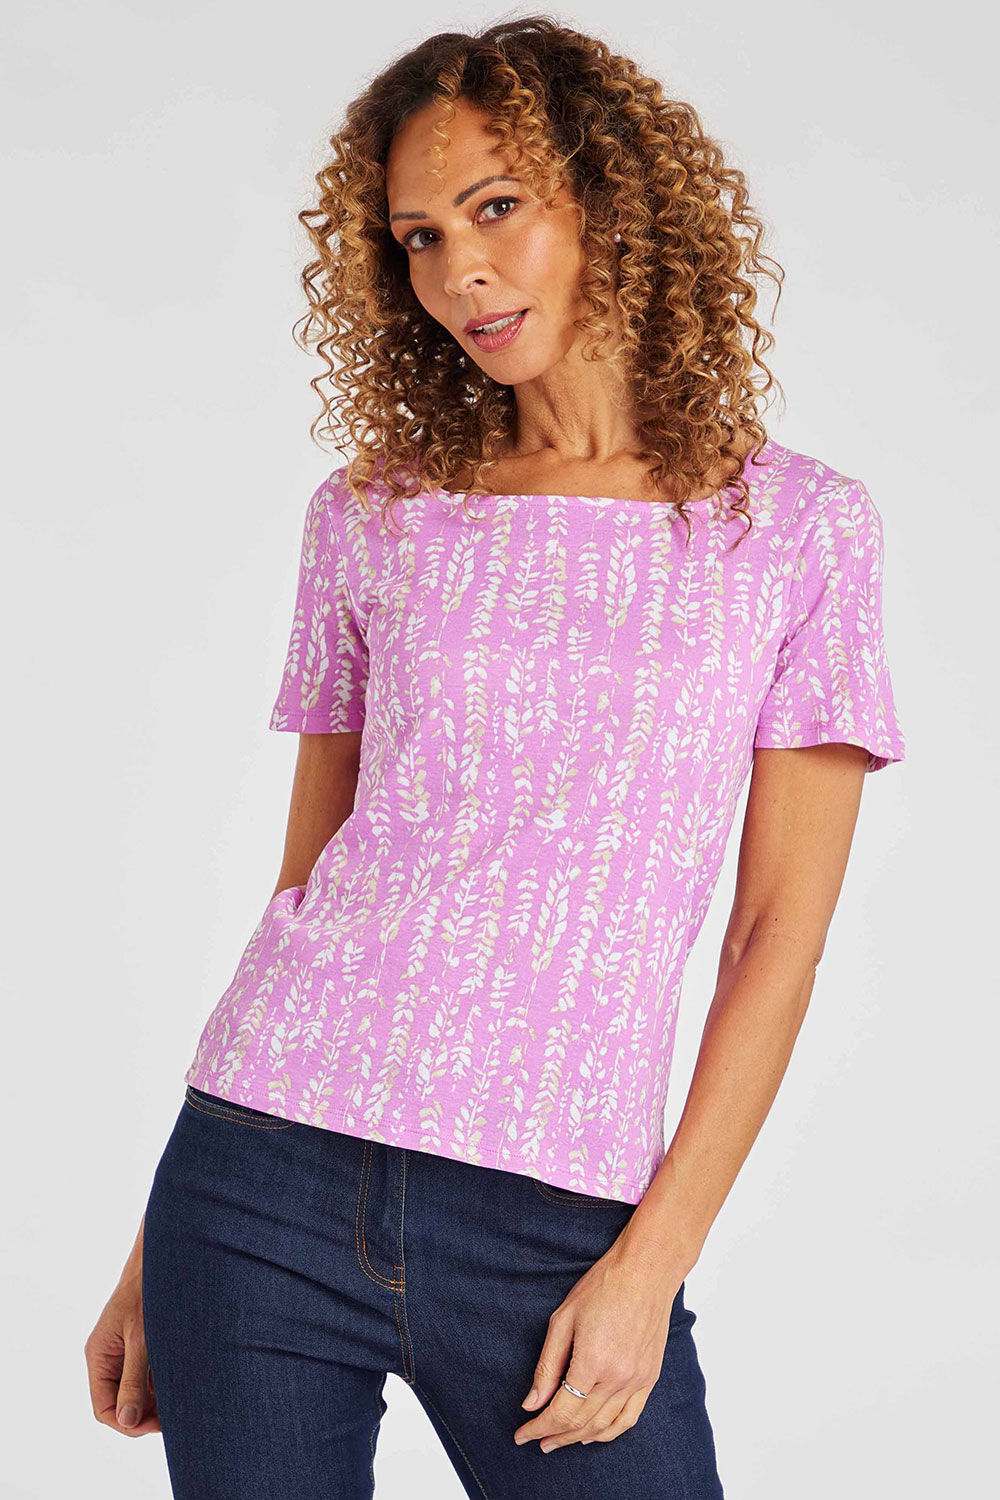 Bonmarche Pink/White Short Sleeve Wild Seed Printed Square Neck Top, Size: 20